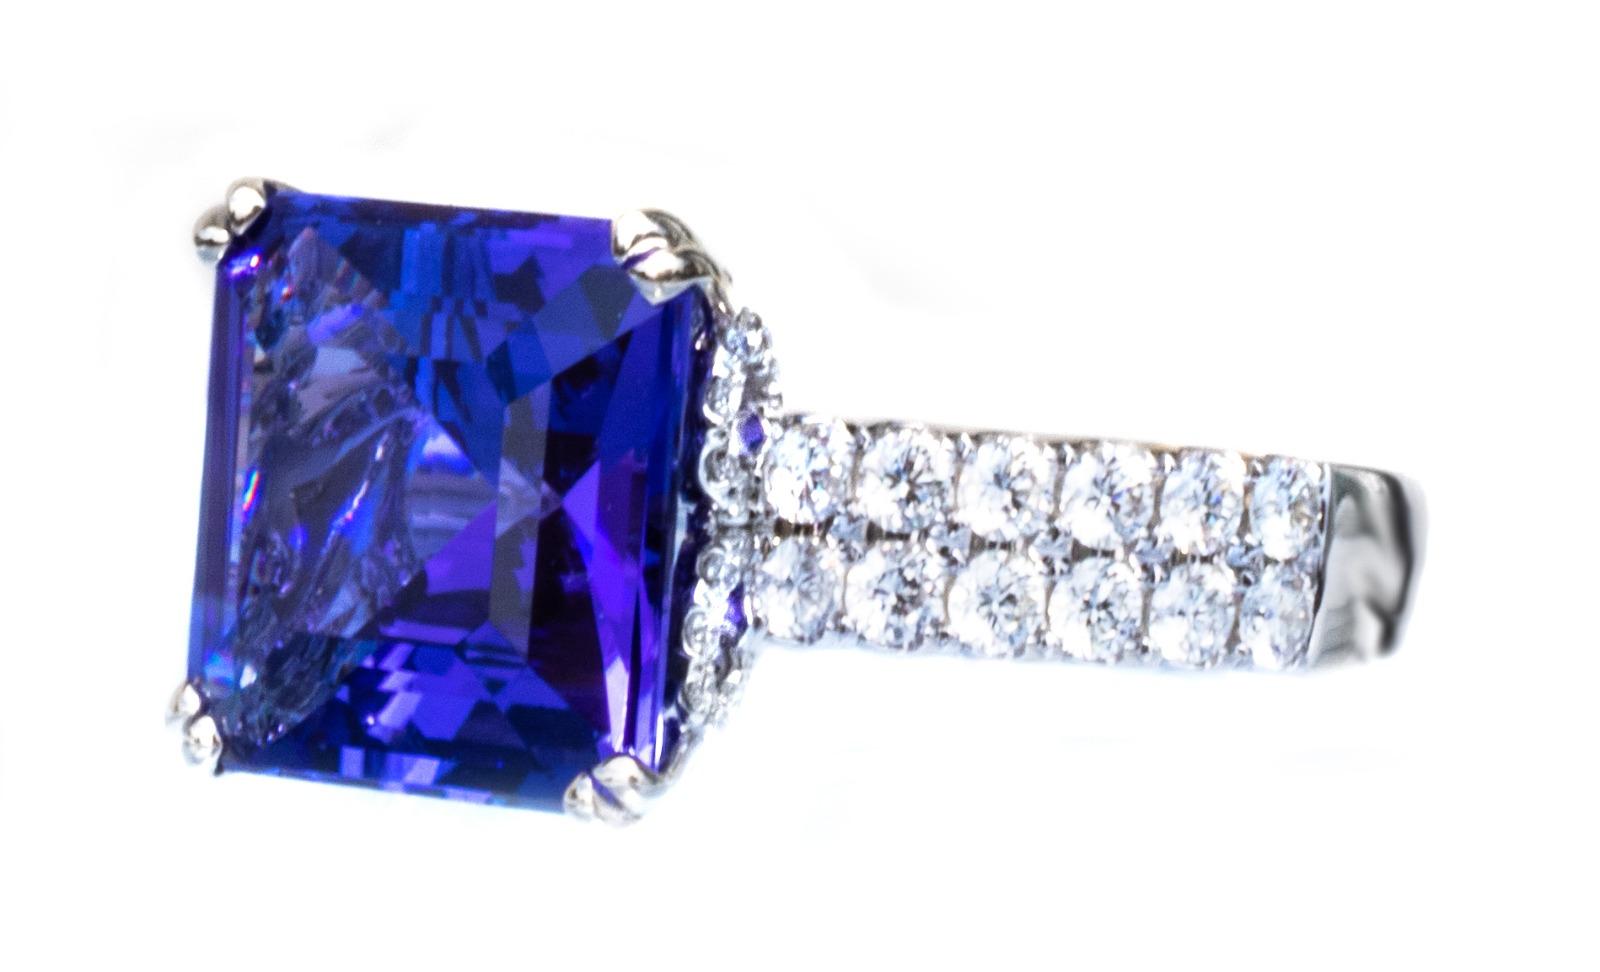 This beautiful ring features a spectacular bluish-purple, natural tanzanite. The Asscher cut showcases gorgeous faceting and is unusual to see with a Tanzanite gemstone.

We put this tanzanite in 18K white gold with 2 rows of large, bright colorless